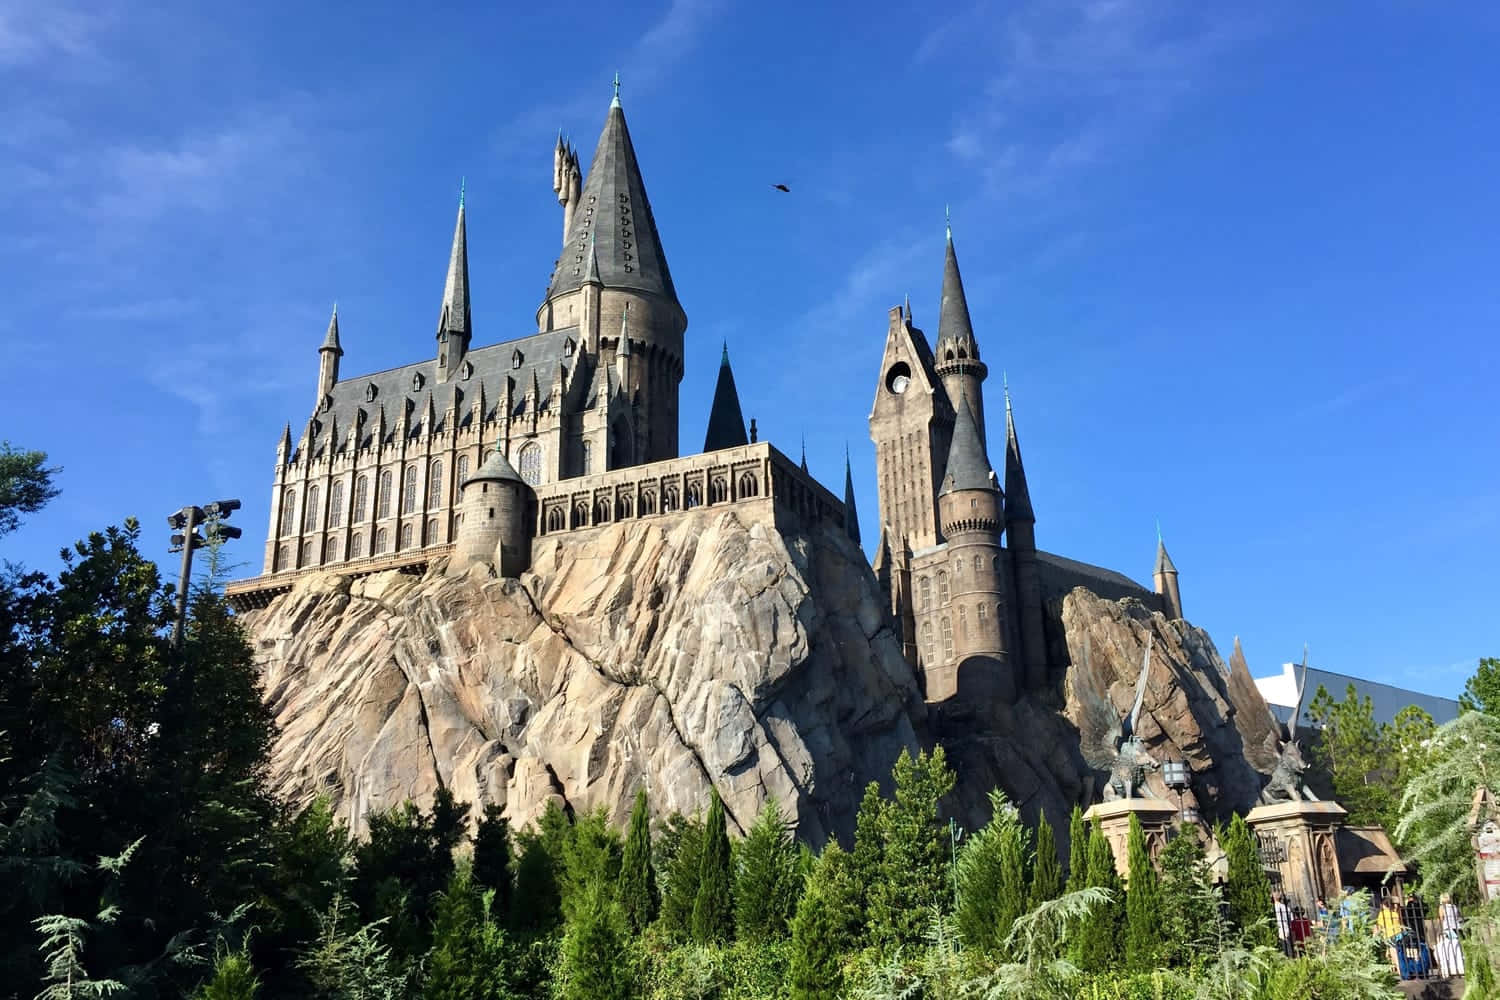 Soar to Hogwarts School of Witchcraft and Wizardry!